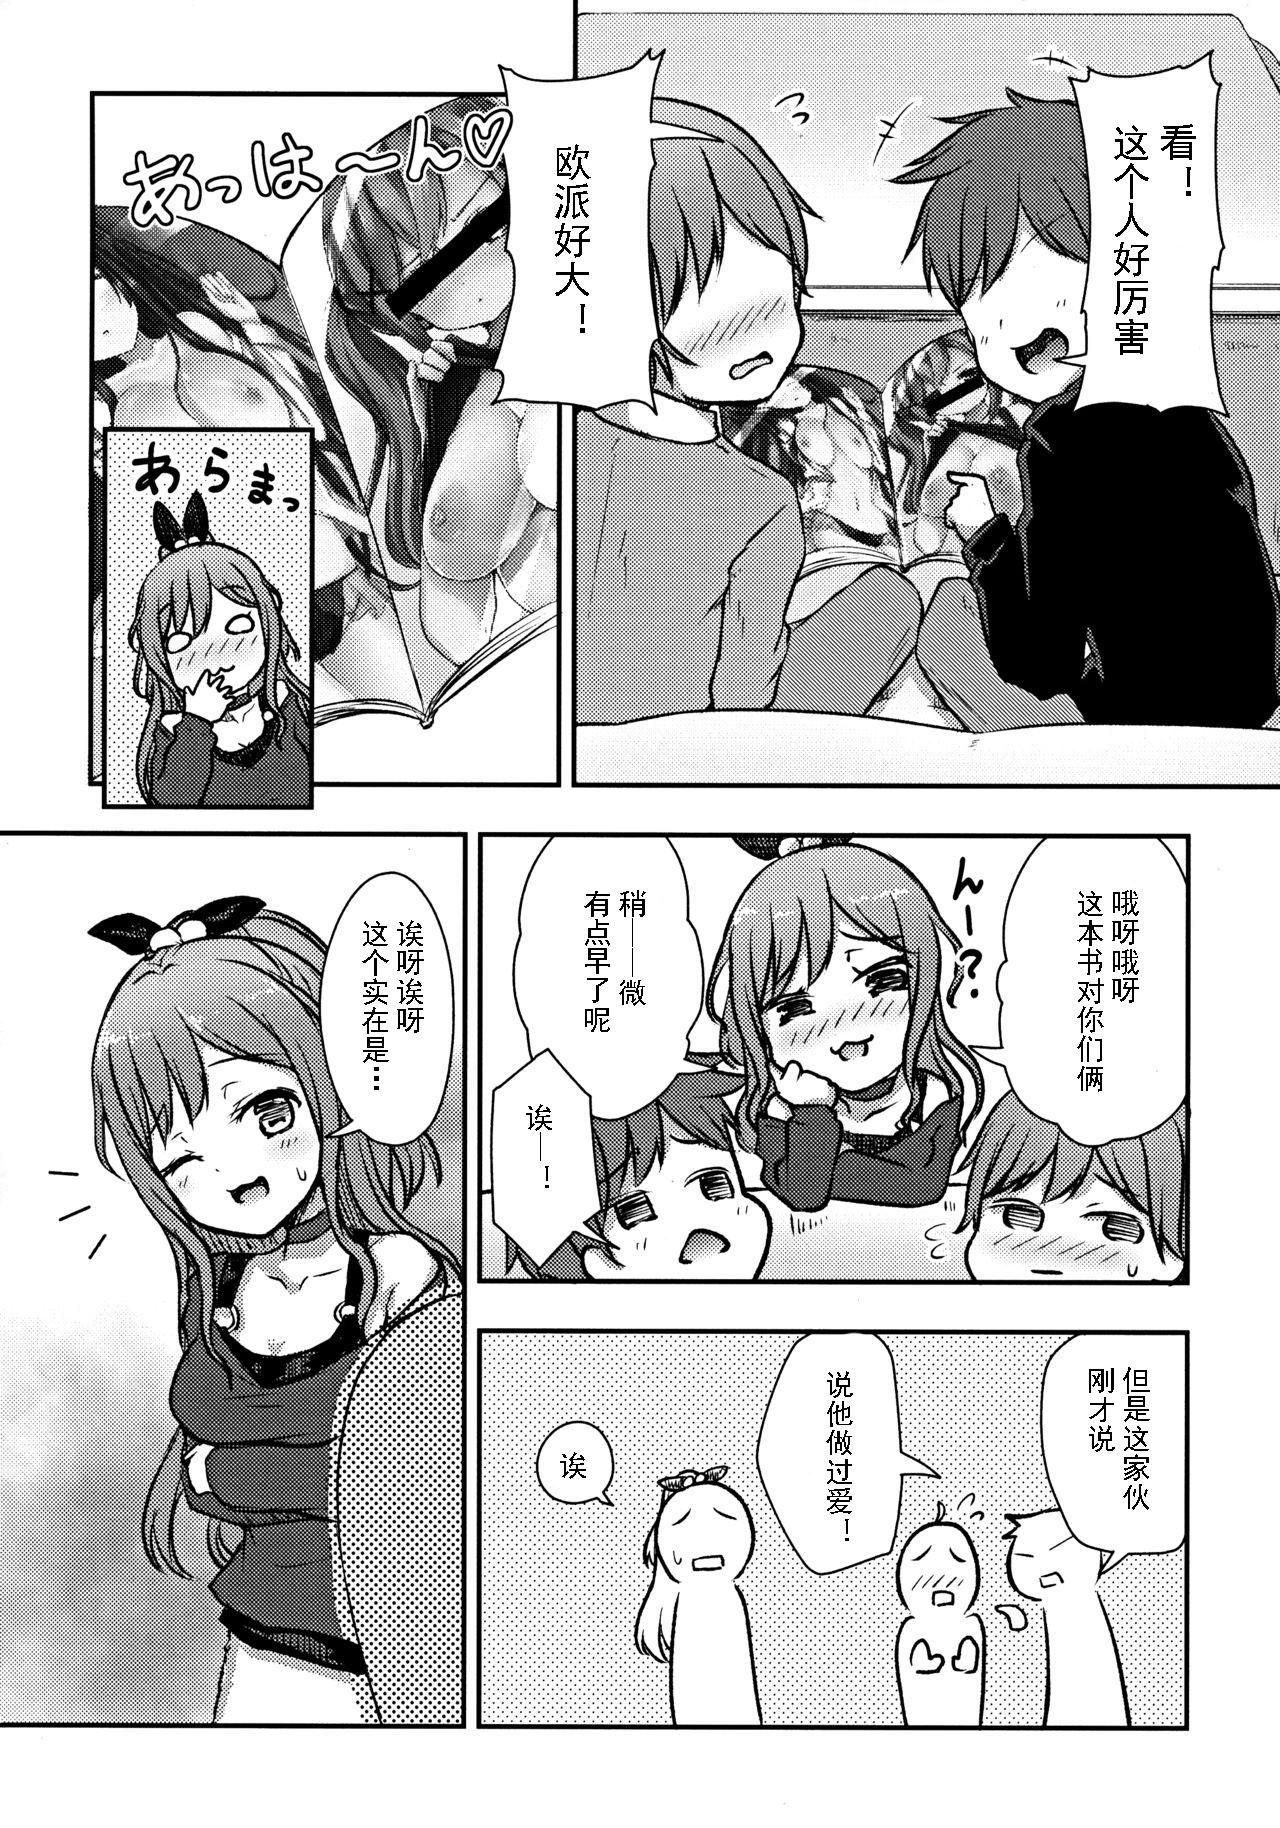 Awesome Hearty Hybrid Household - Bang dream Ink - Page 3